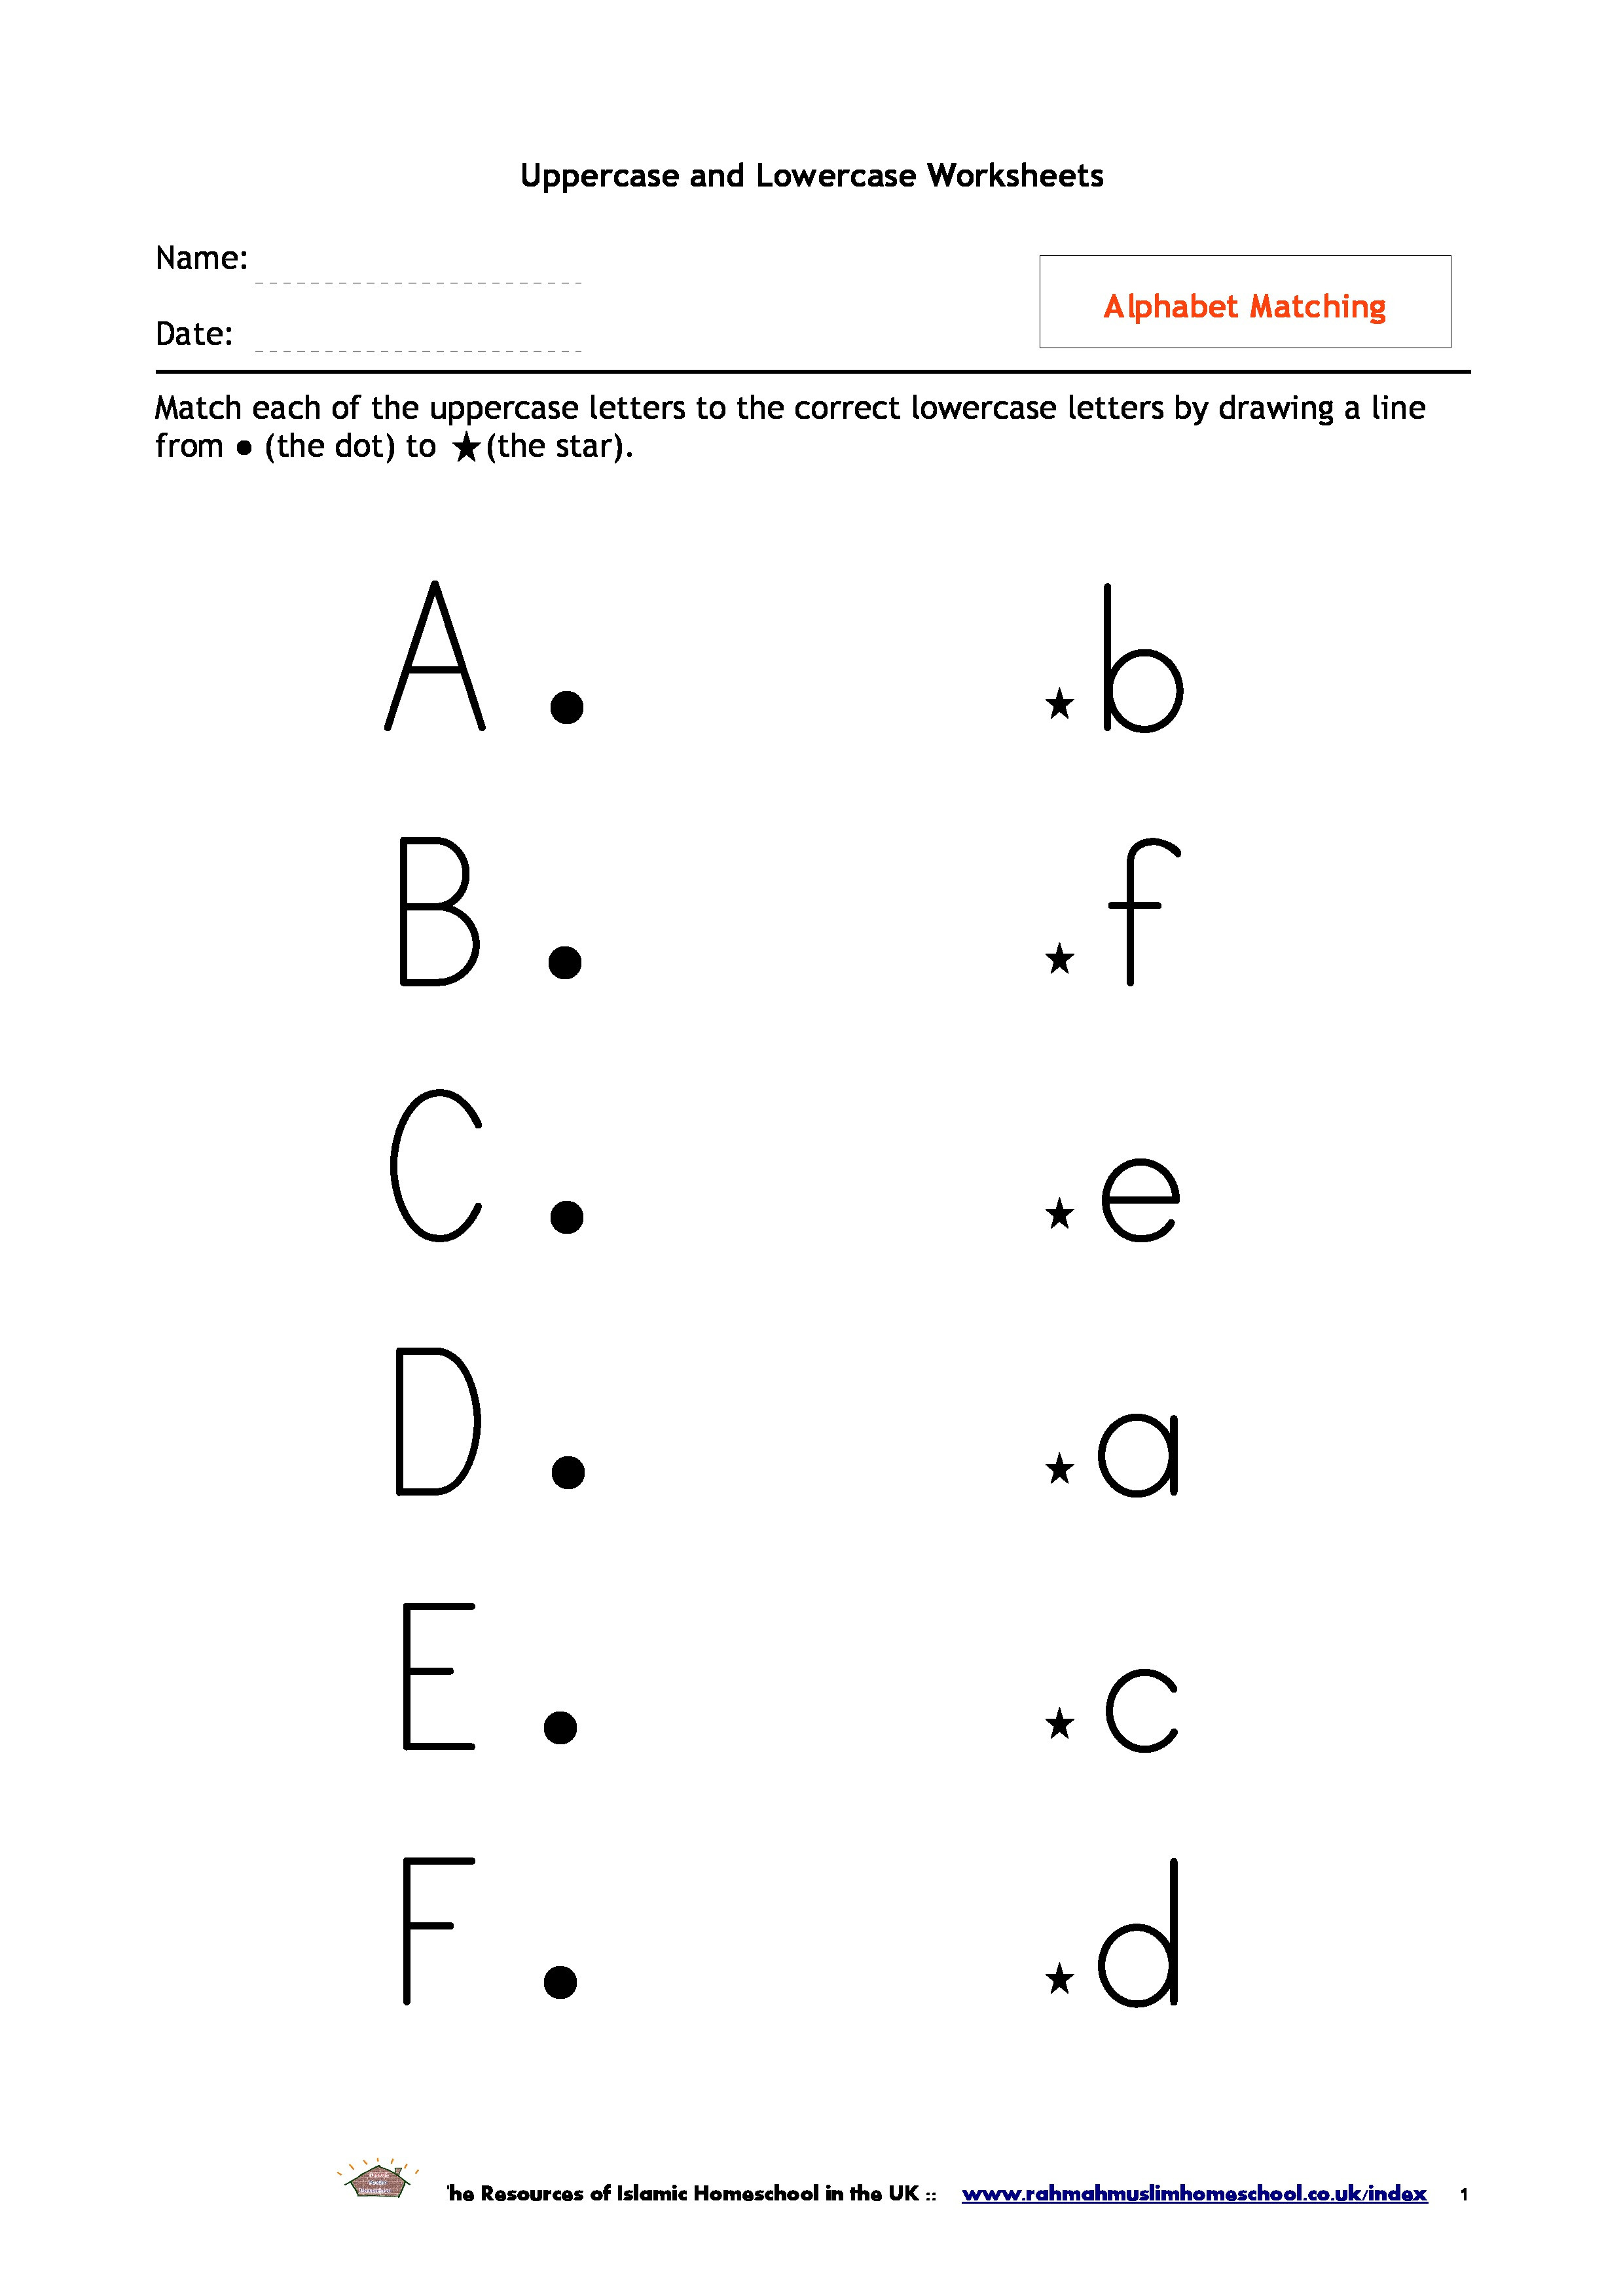 Alphabet Matching Worksheets  The Resources Of Islamic